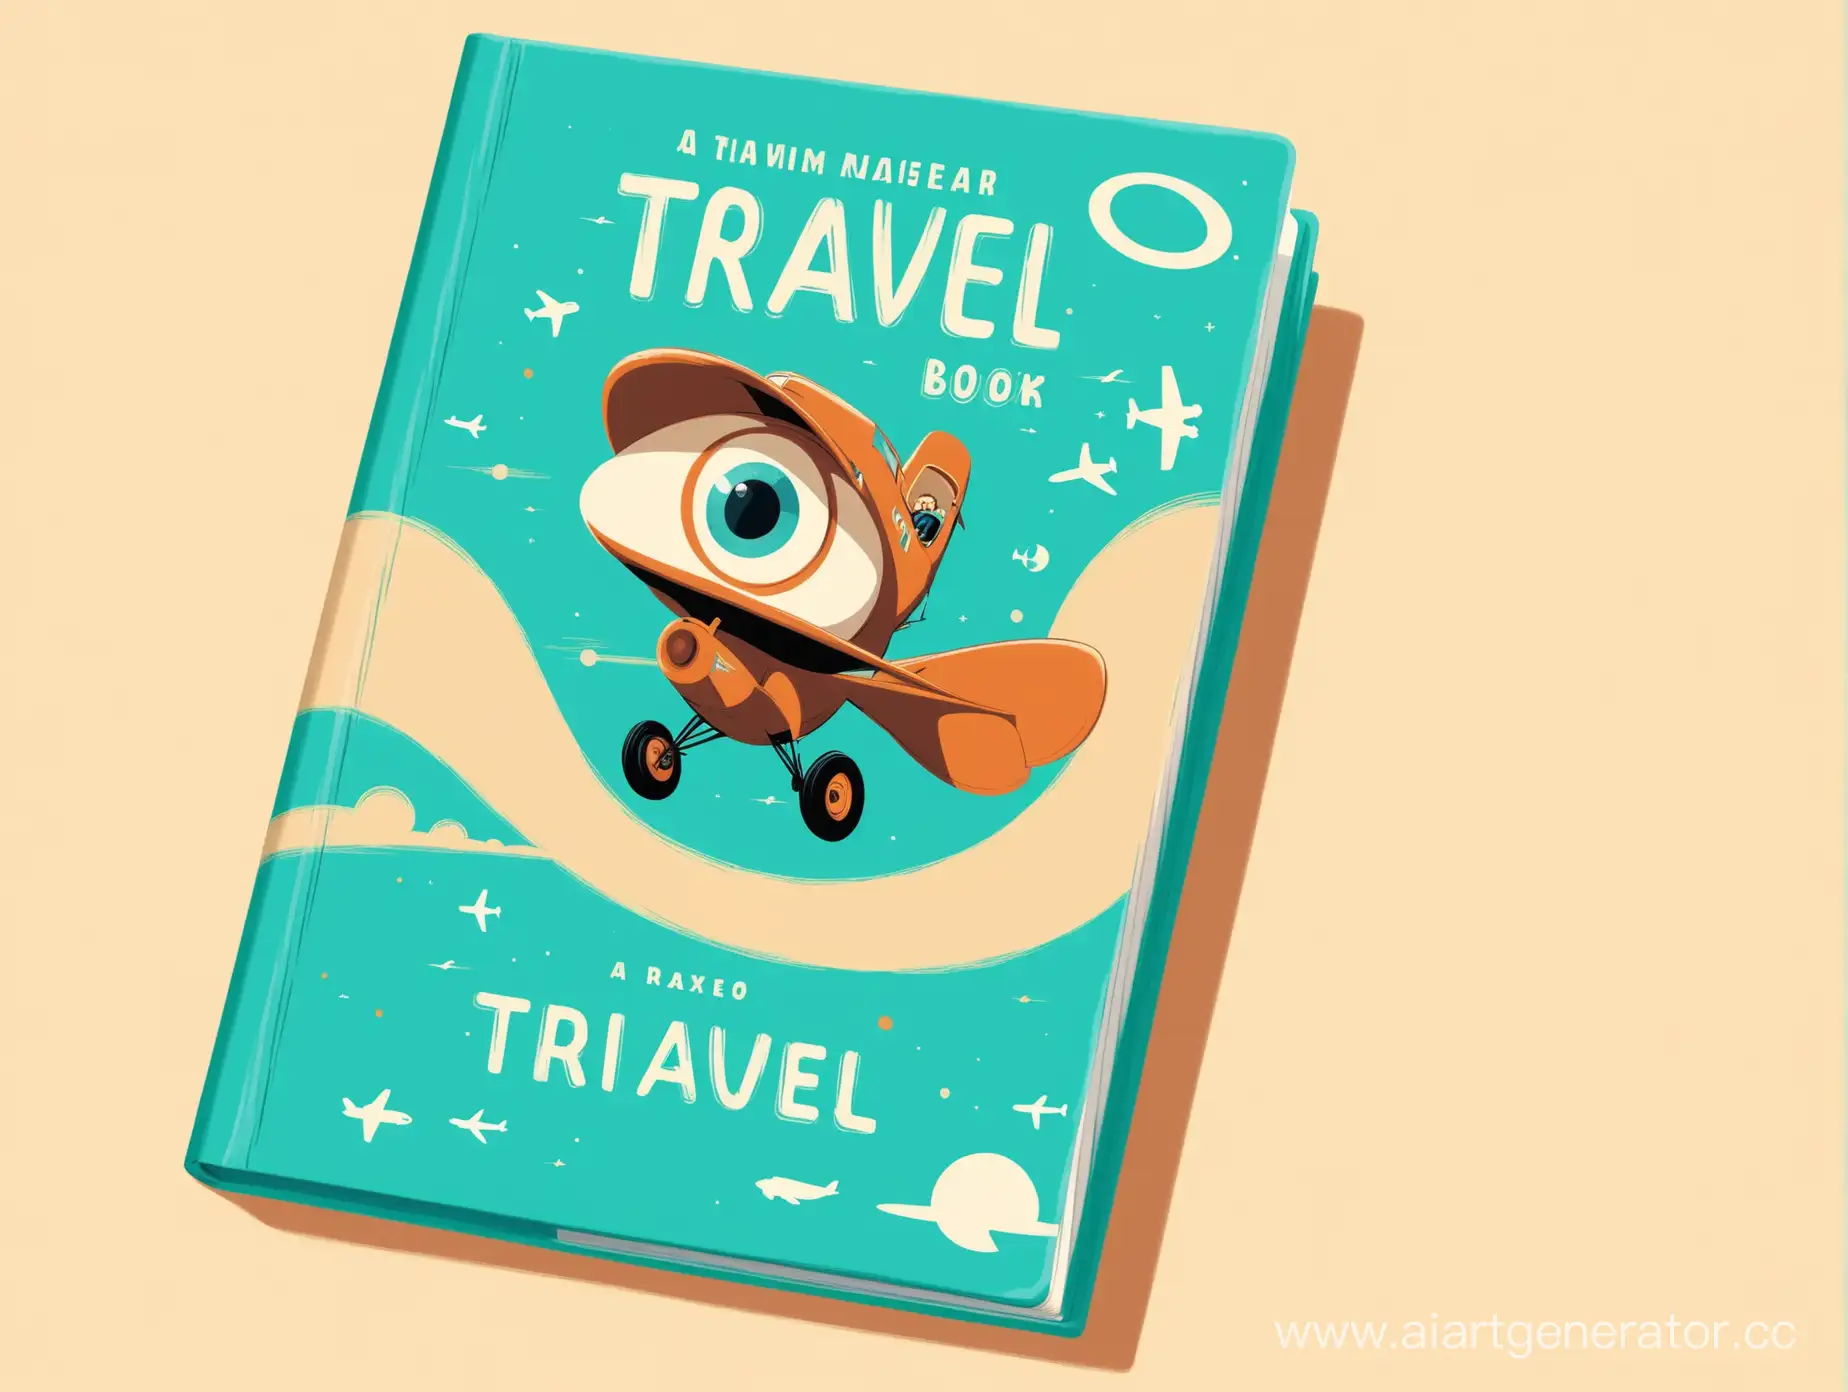 Turquoise-and-Beige-Travel-Adventure-Inspired-by-PIXAR